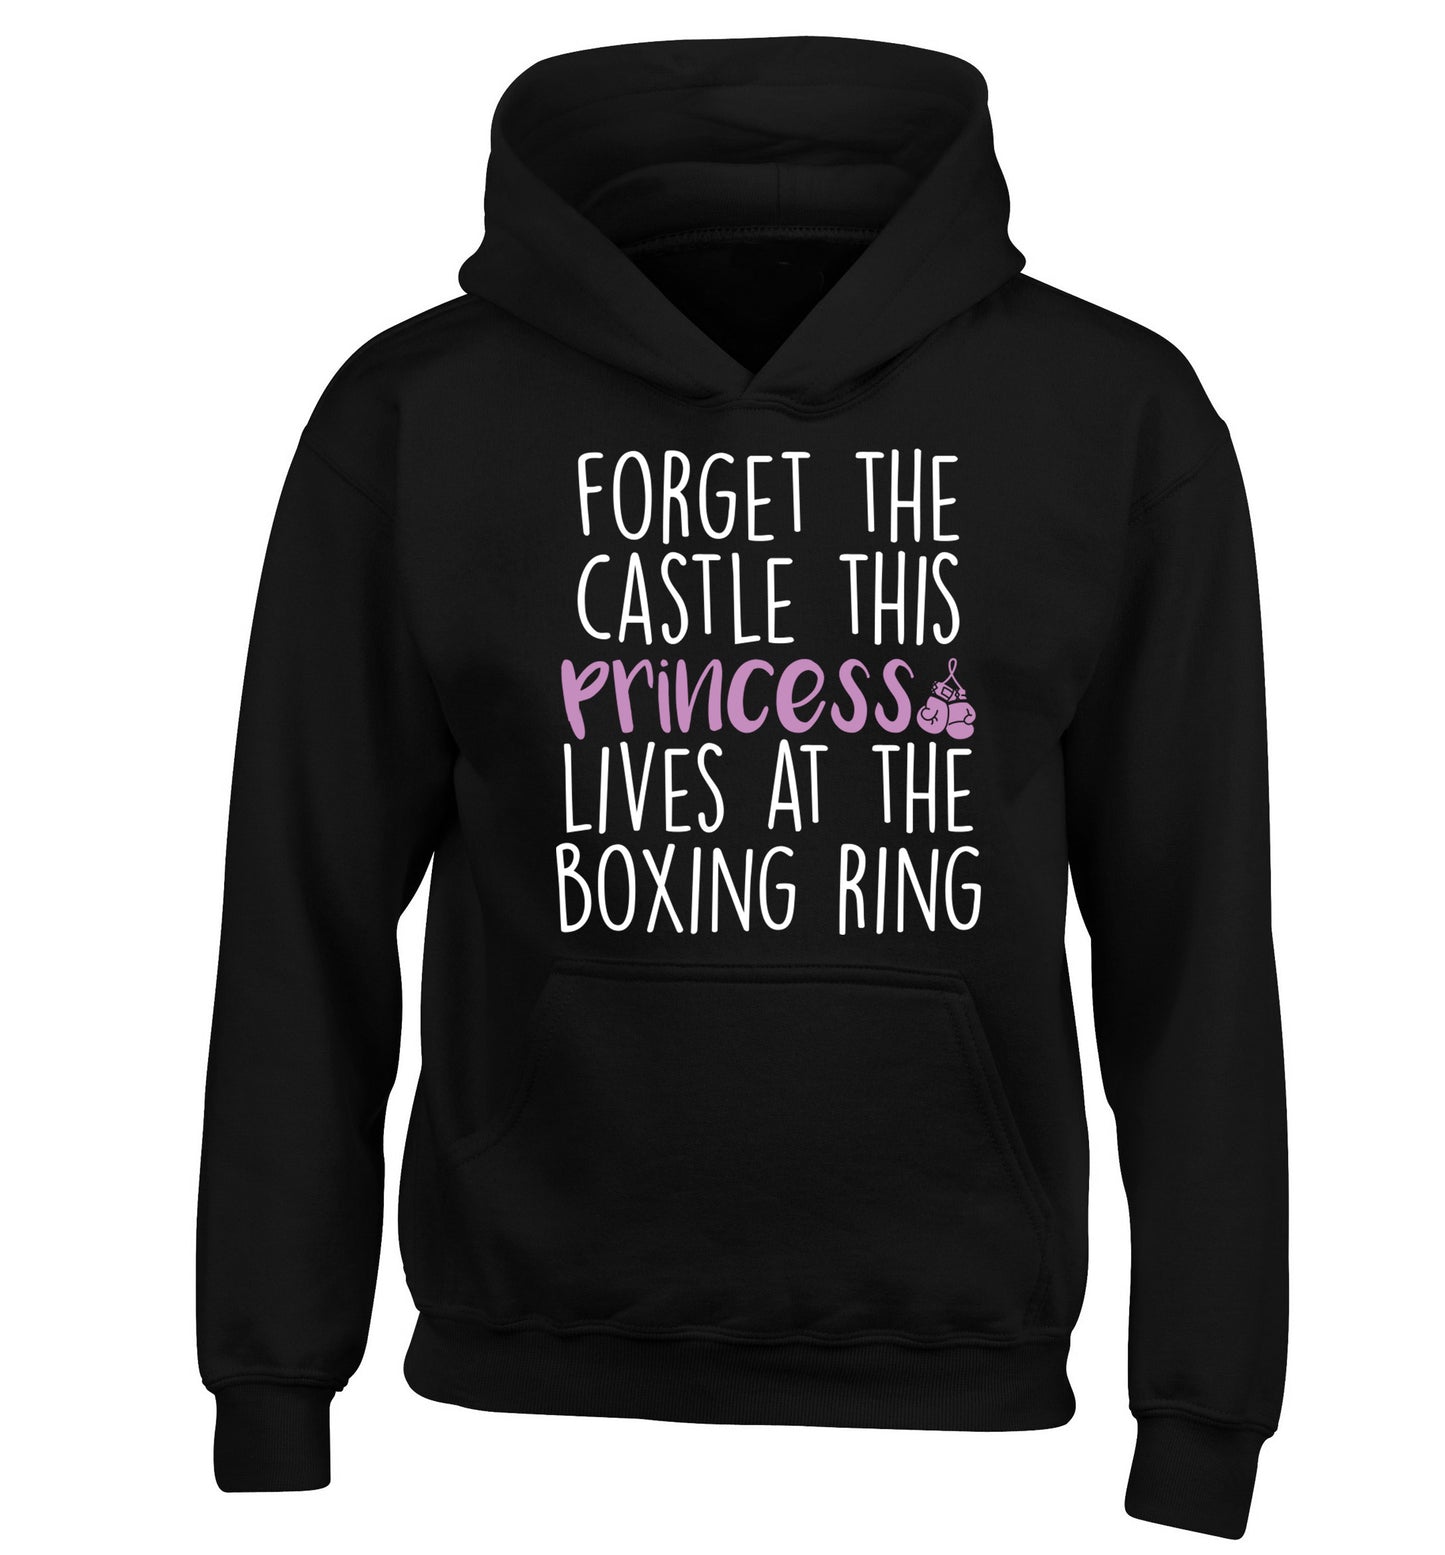 Forget the castle this princess lives at the boxing ring children's black hoodie 12-14 Years